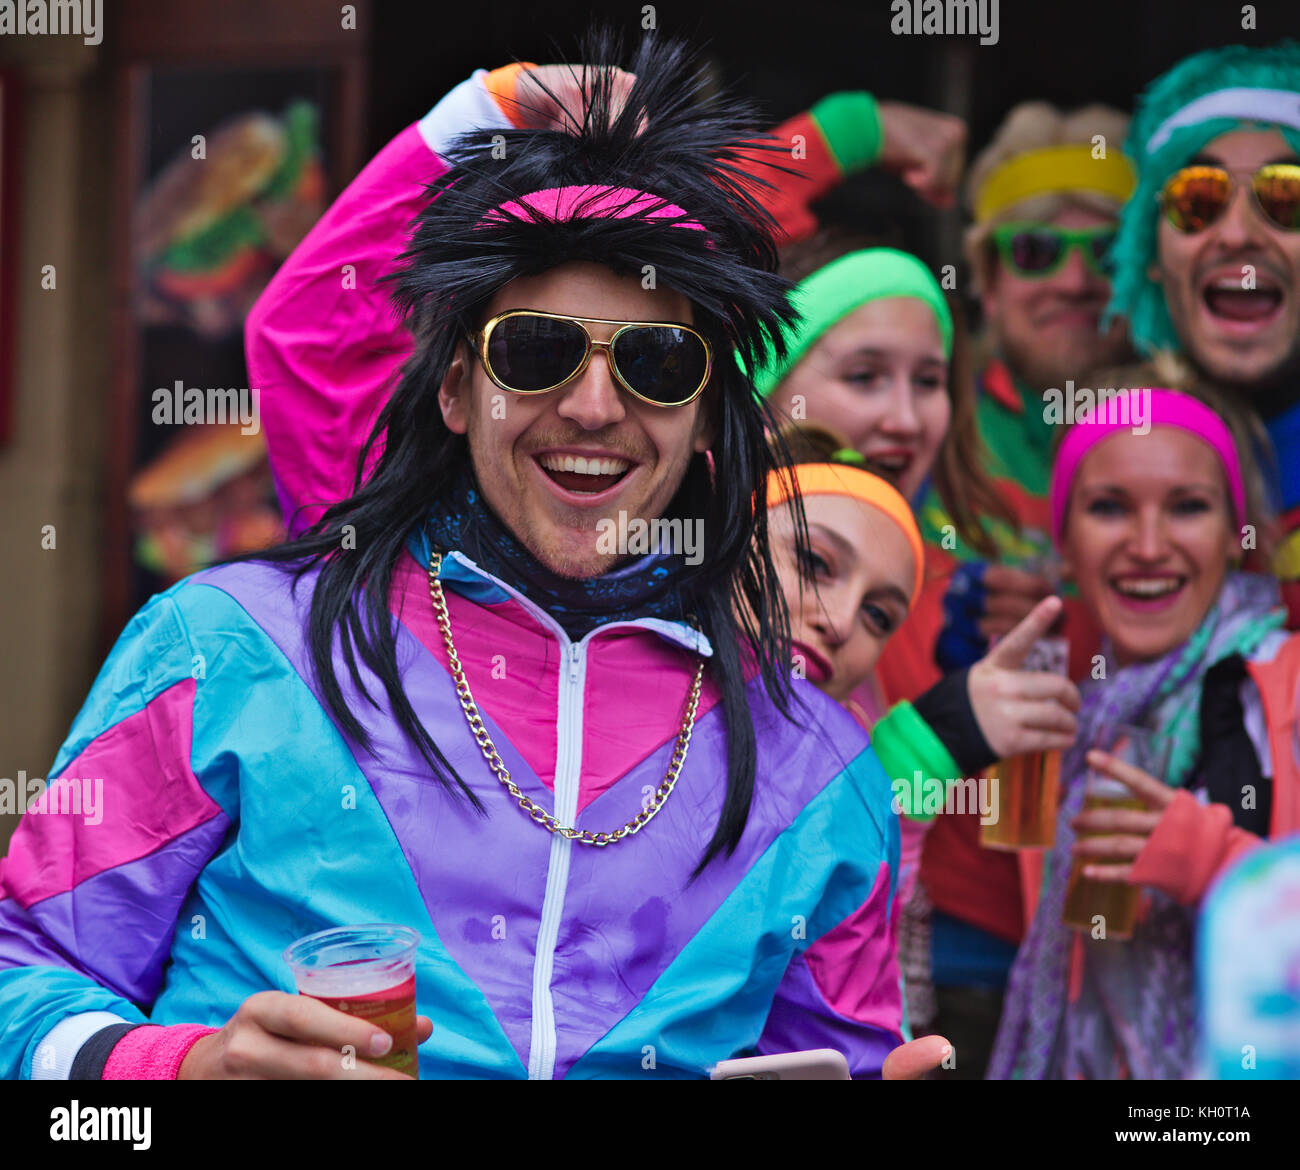 Cologne, Germany, 11 Nov, 2017, Cologne traditionally opens the carnival season Nov. 11th every year. People dressed up and went outside despite the rainy weather. Picture shows a group of people dressed in 70's clothes with a great big smile, Detlef Herklotz / Alamy Live News Stock Photo